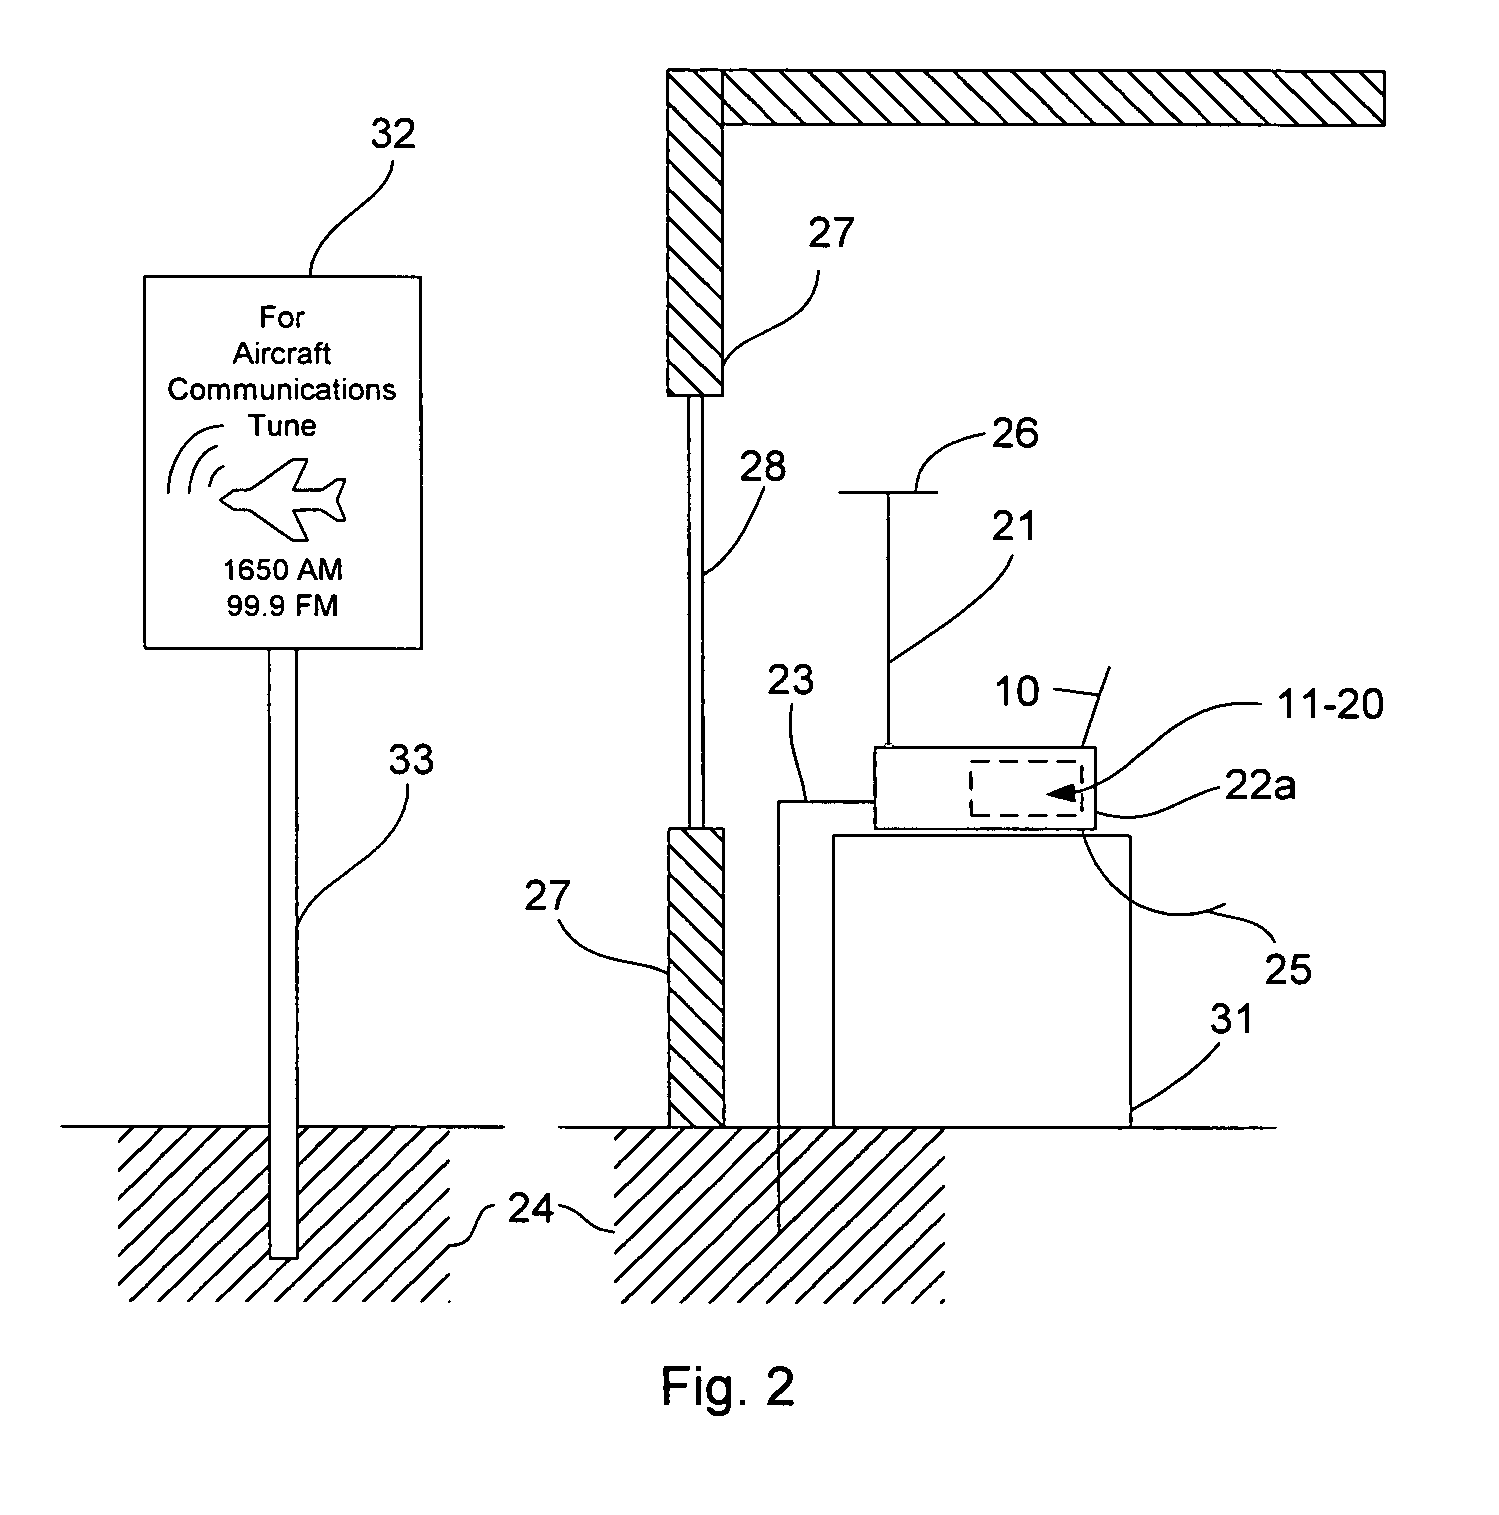 Low power radio device for providing access to aircraft communications (or other specialized communications) to the general public via commercial radio bands and receivers